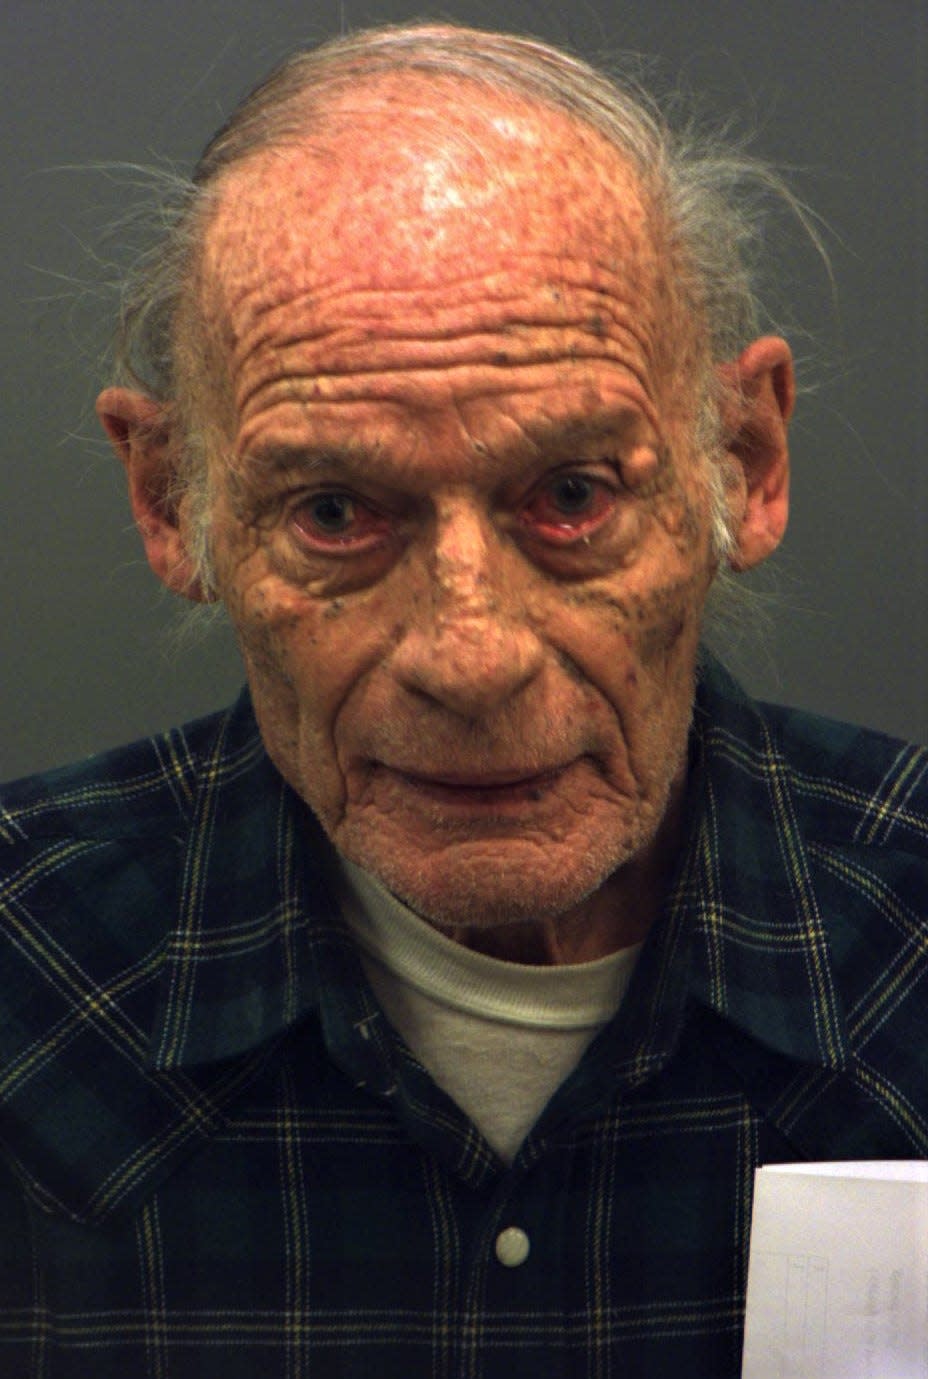 Robert William Shewan, 79, is charged with possession of child pornography.